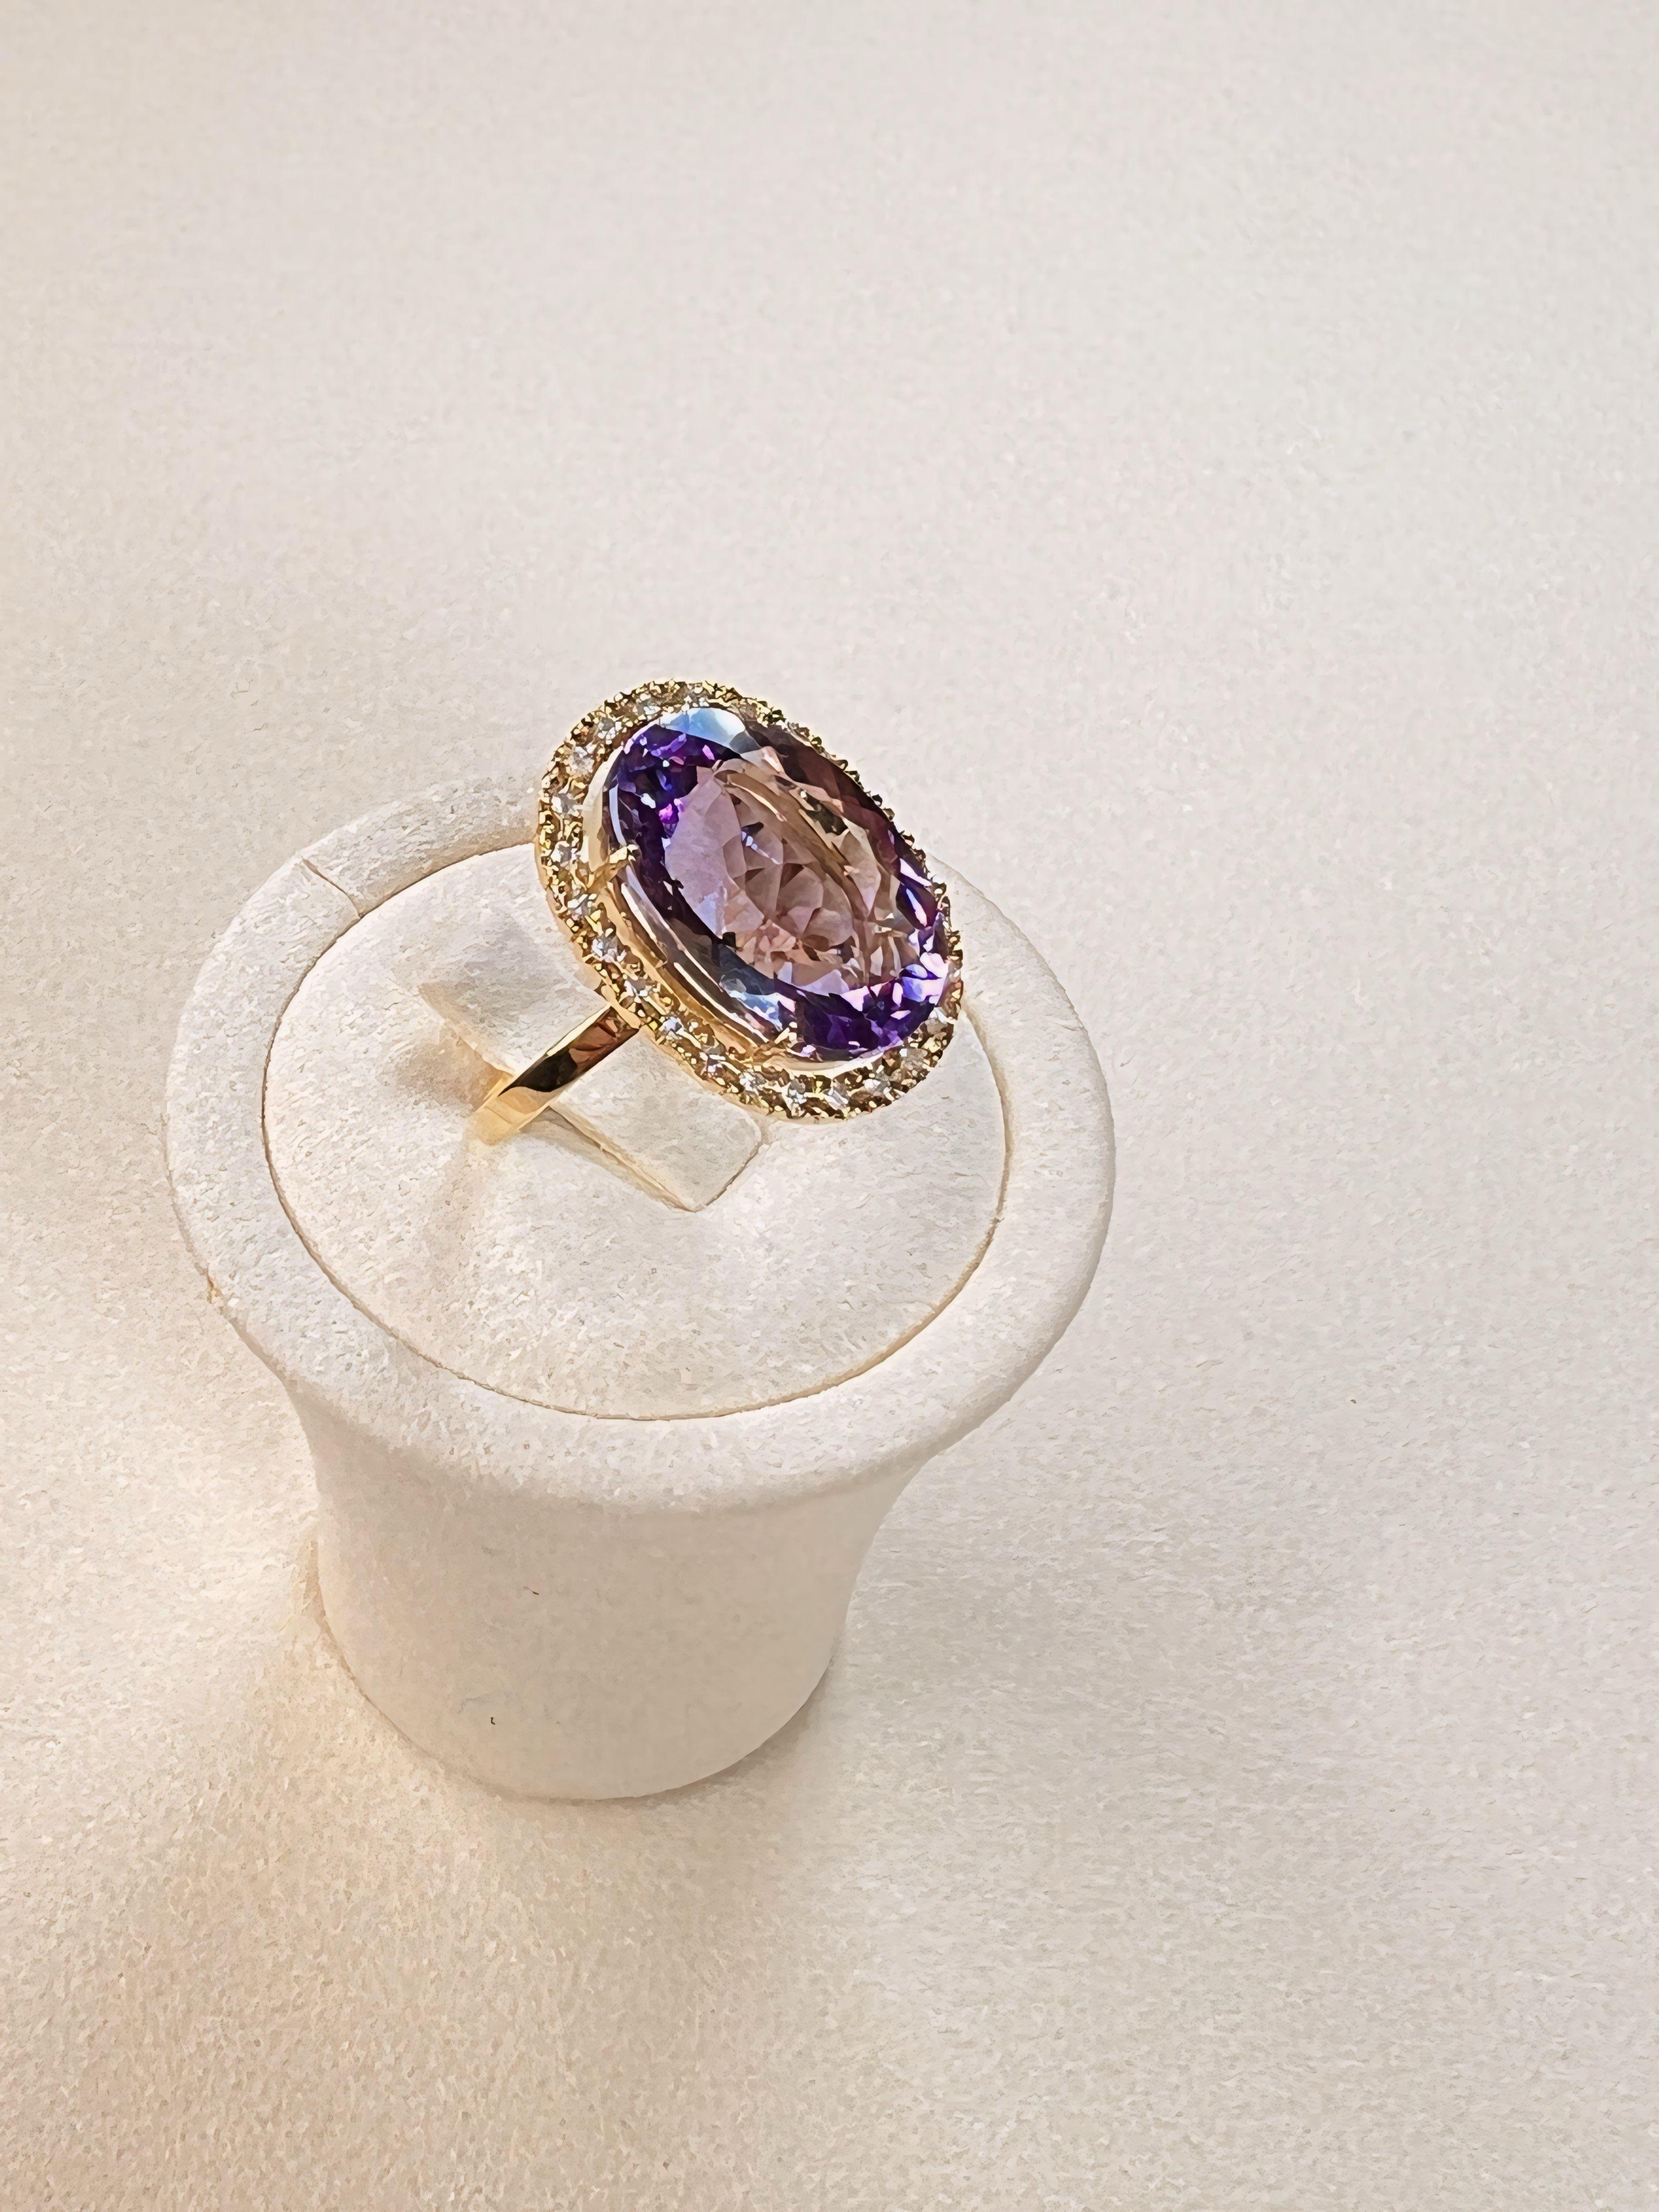 Oval Cut Rose D'France Amethyst & Diamond Ring - 18k Solid Gold For Sale